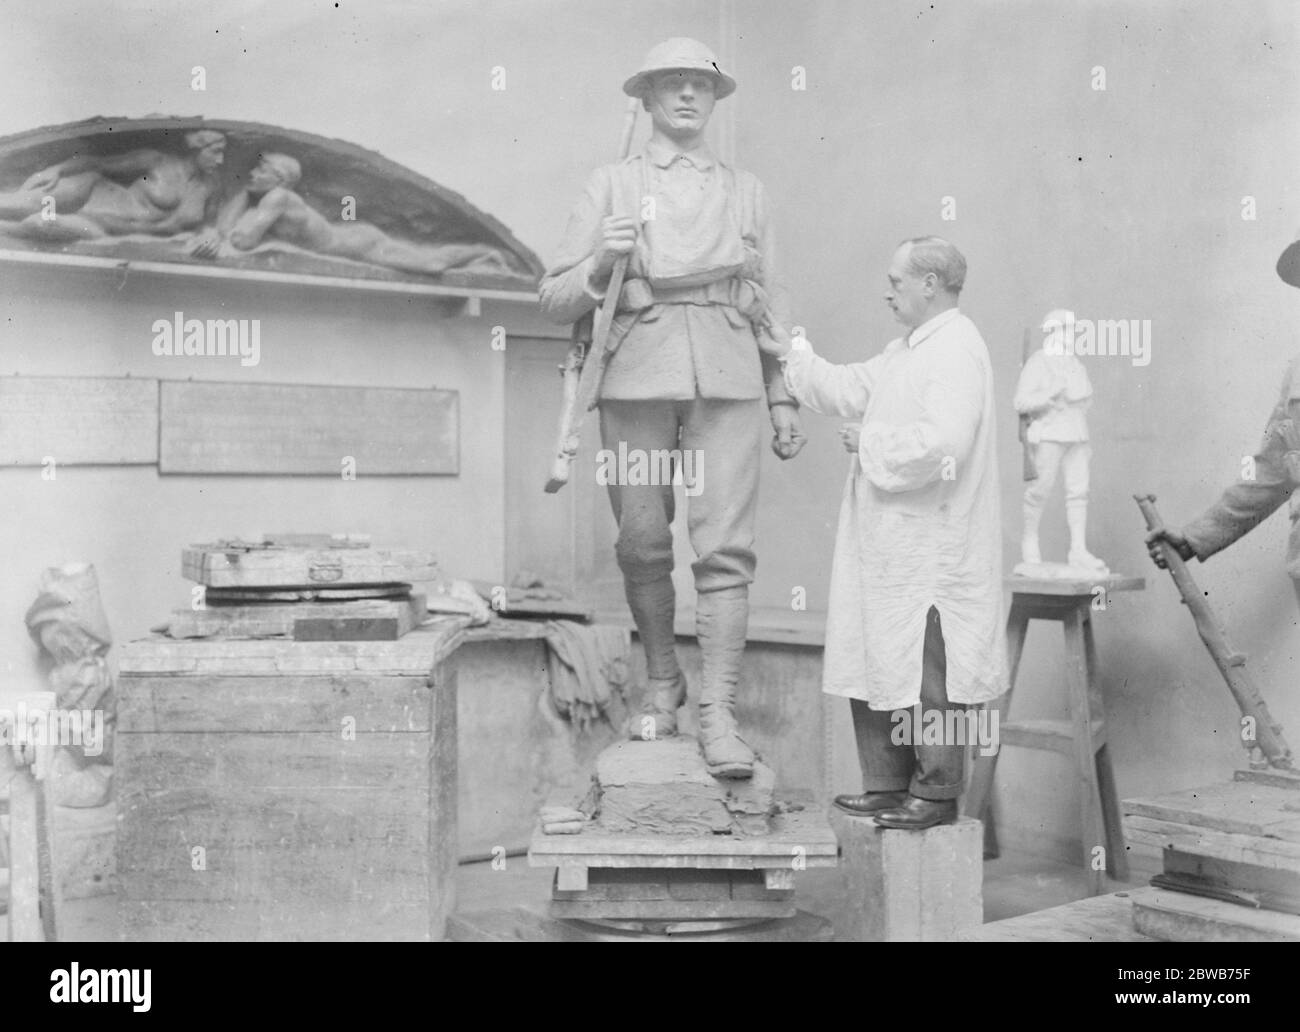 A striking memorial of architectural design for the Rifle Brigade . Mr John Tweed is engaged on the completion of a striking war memorial for the Rifle Brigade . It is of architectural design , with three imposing figures , representing different uniform periods of the regiment . Mr Tweed at work on the memorial . 8 April 1924 Stock Photo